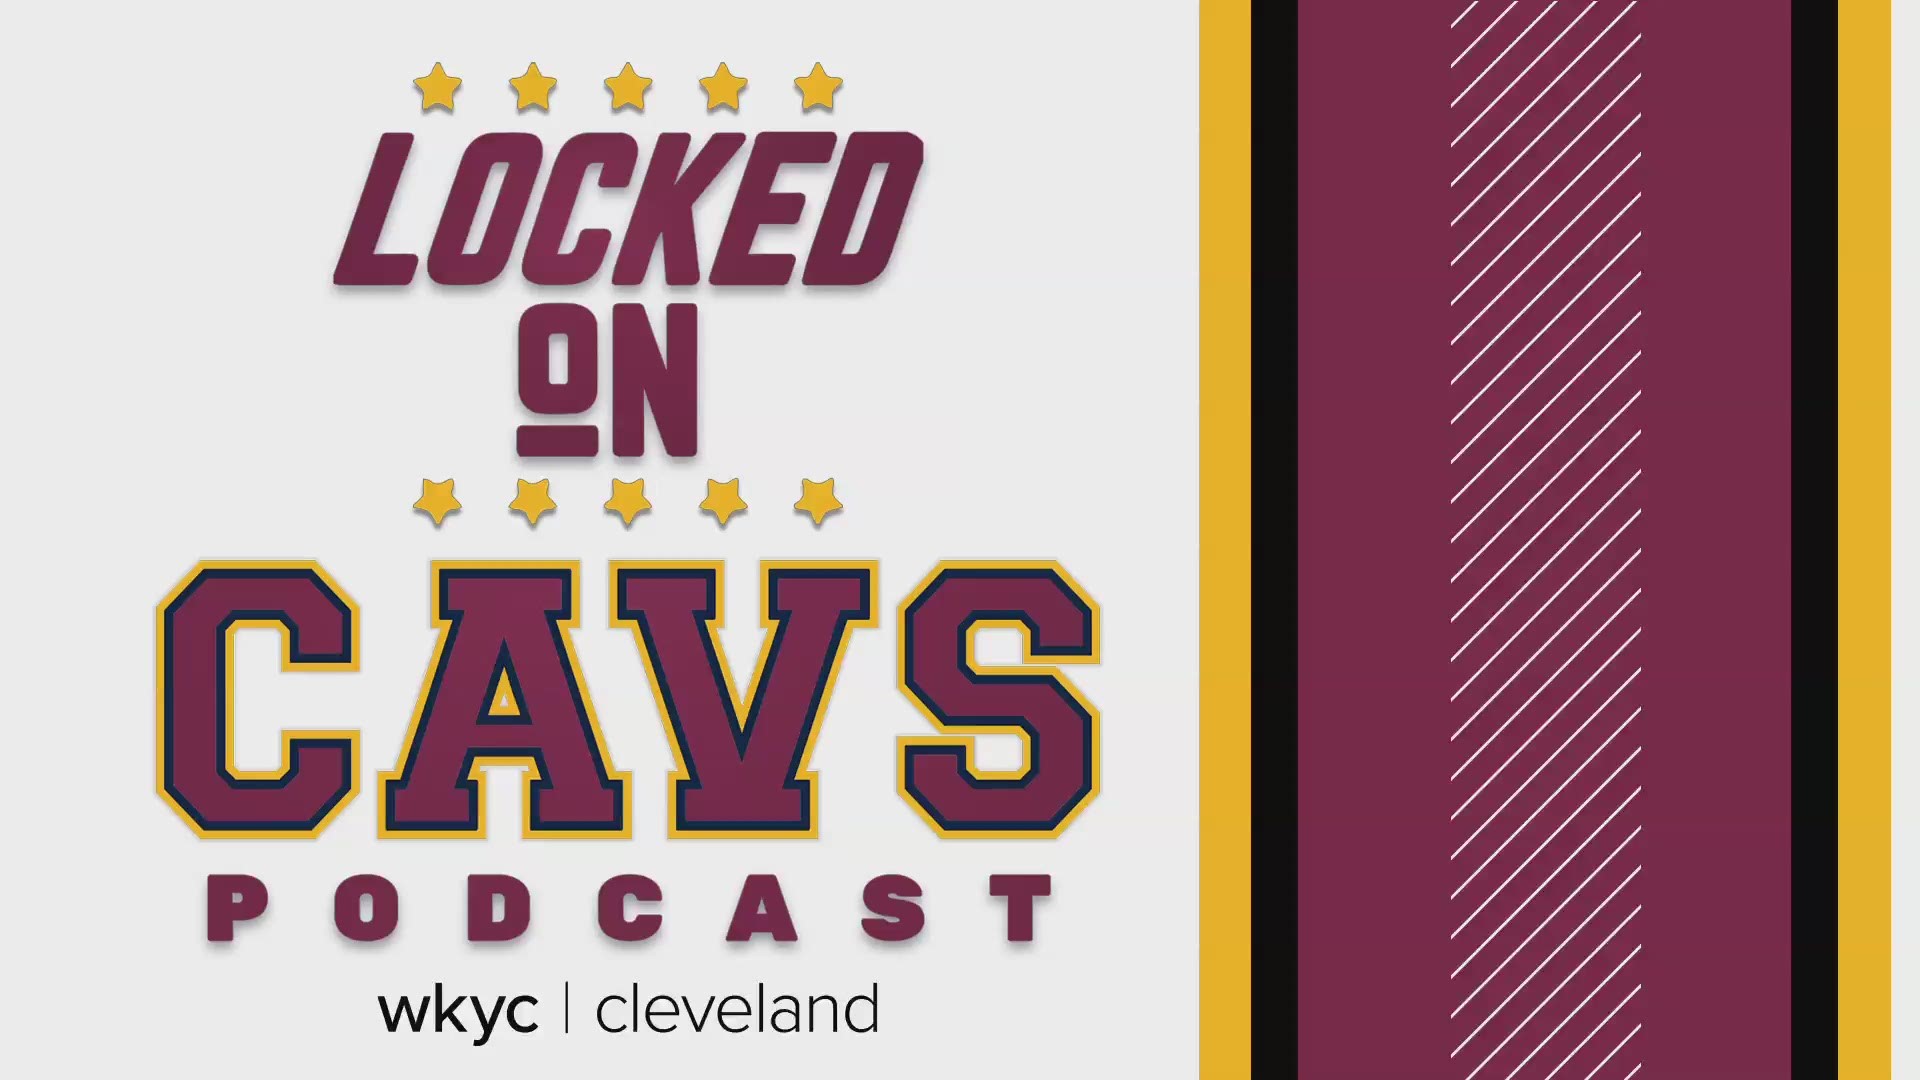 Chris Manning and Evan Dammarell are joined by 3News' Dave DeNatale to discuss the state of the Cleveland Cavaliers and potential Andre Drummond trade packages.